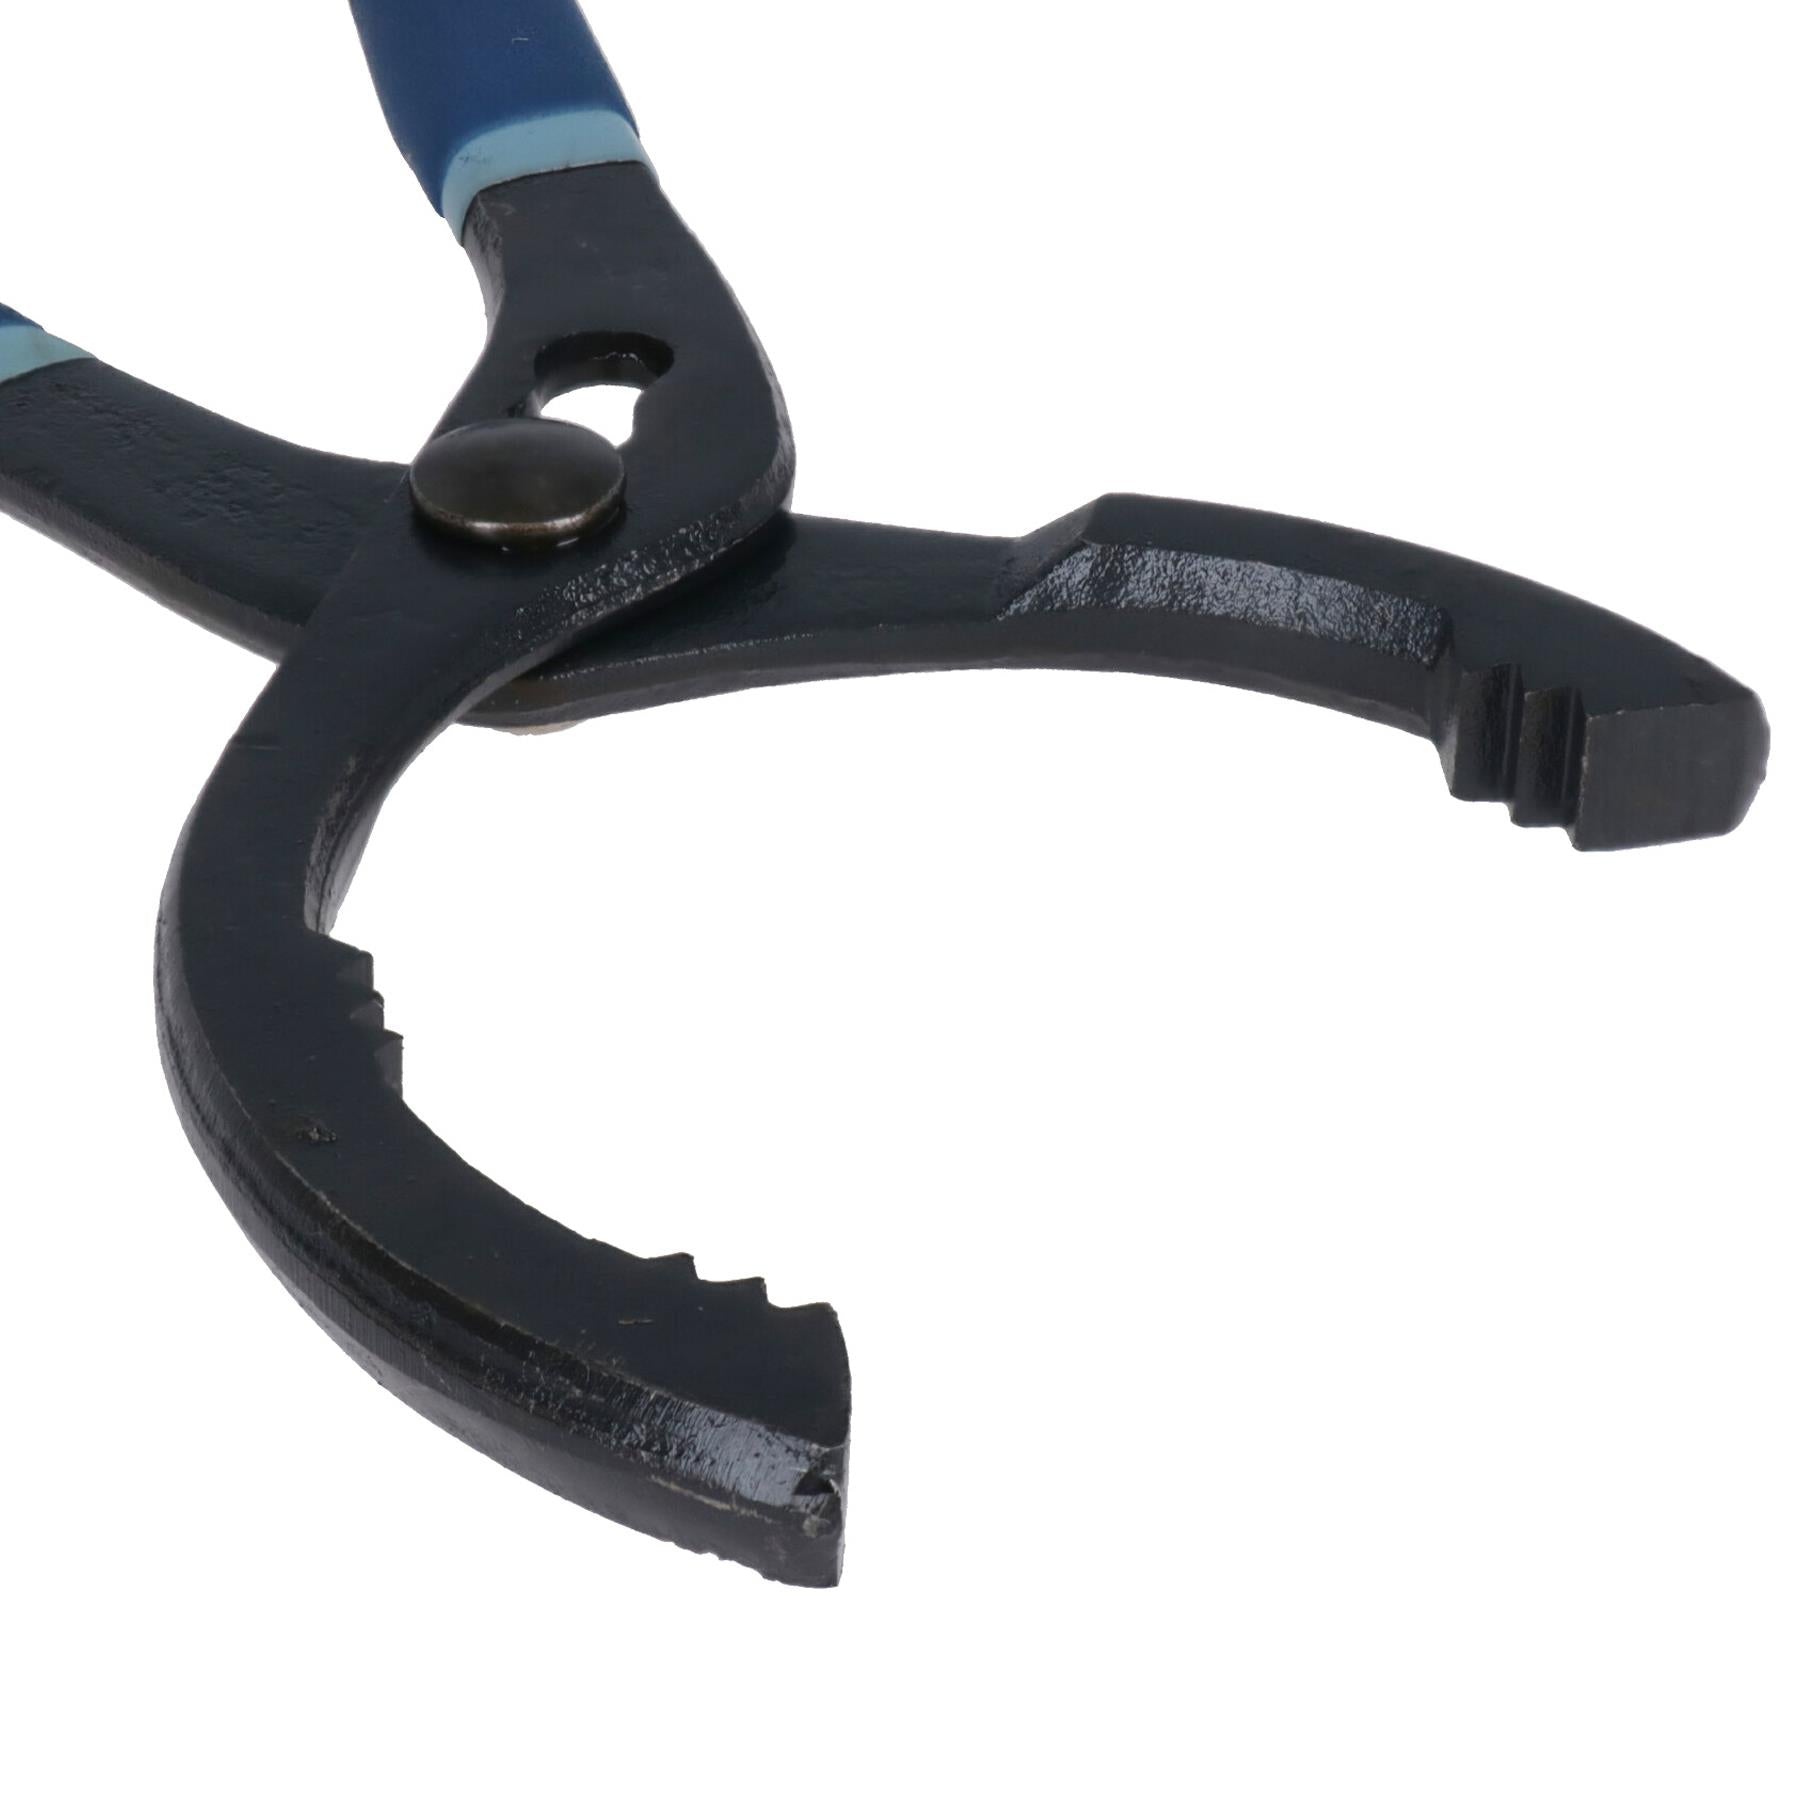 12" adjustable Oil filter wrench / pliers / remover from 60mm to 115mm TE017